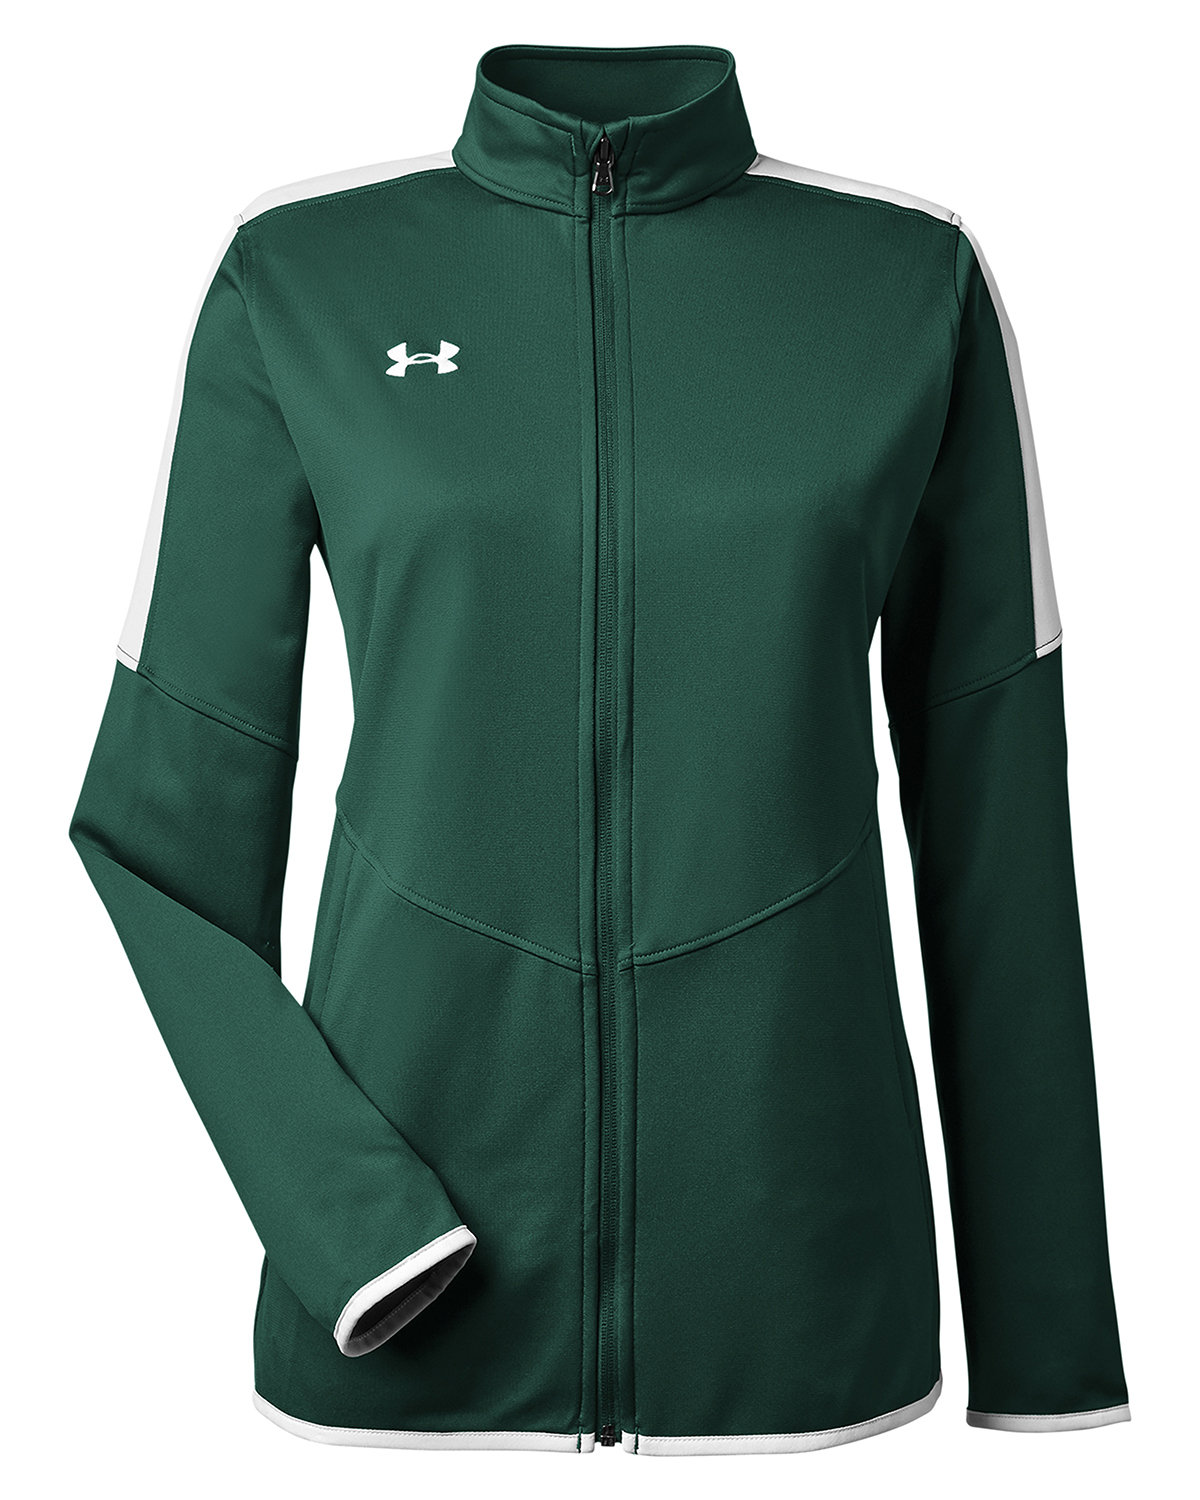 https://www.drivemerch.com/wp-content/uploads/2022/03/branded-under-armour-ladies-rival-knit-jacket-forest-green.jpg